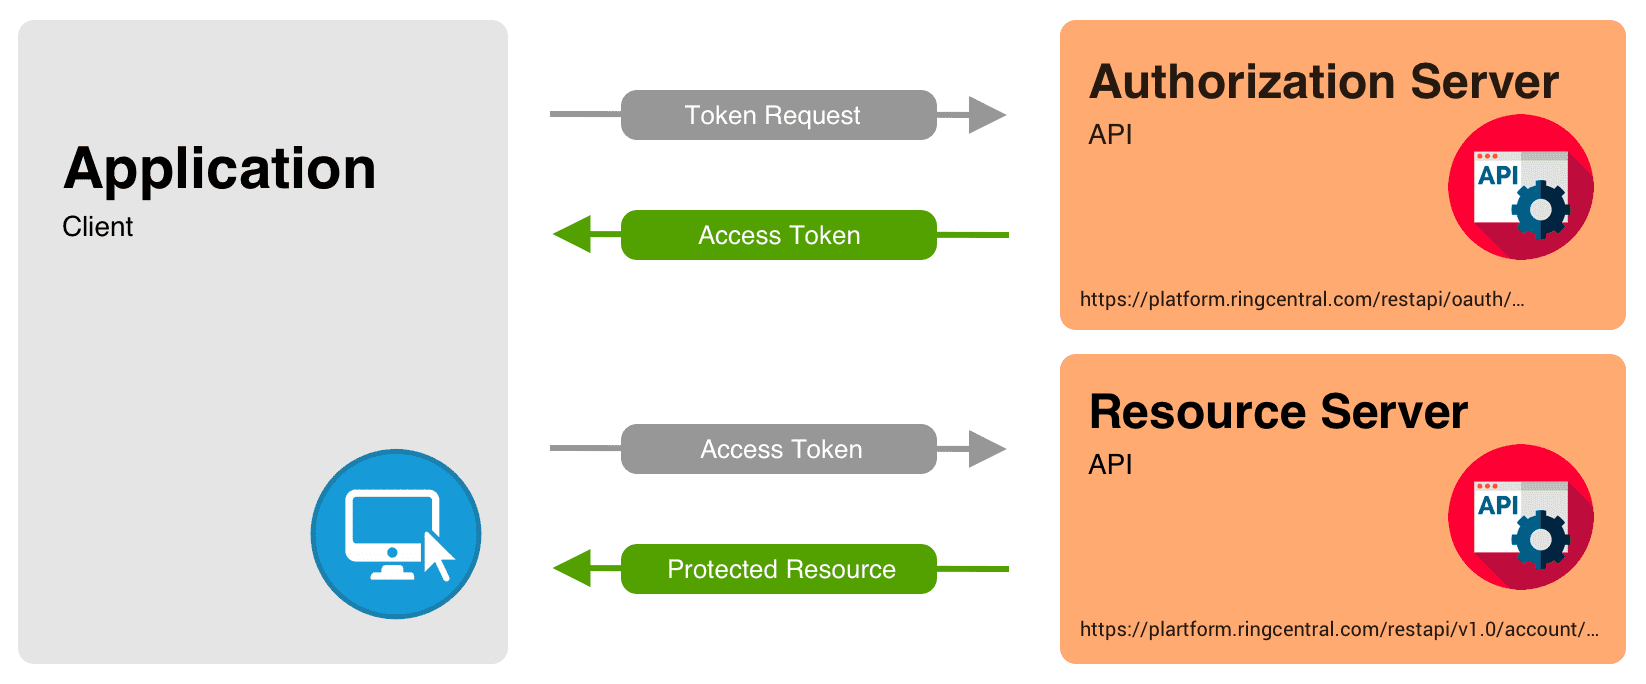 Can I use a bearer authorization token for the REST API Source